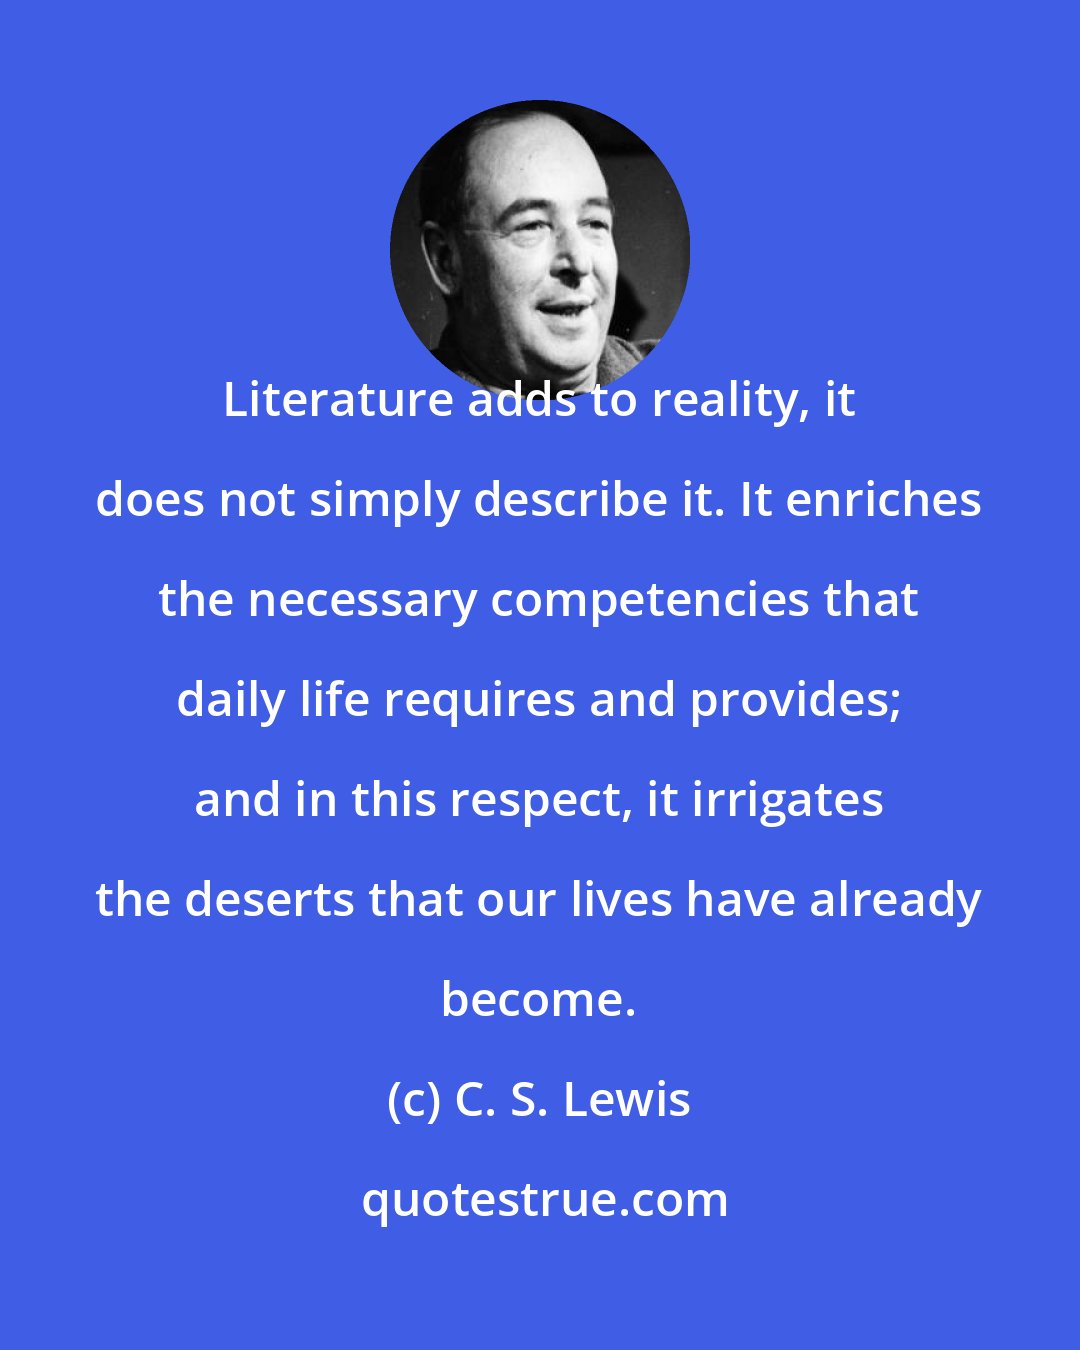 C. S. Lewis: Literature adds to reality, it does not simply describe it. It enriches the necessary competencies that daily life requires and provides; and in this respect, it irrigates the deserts that our lives have already become.